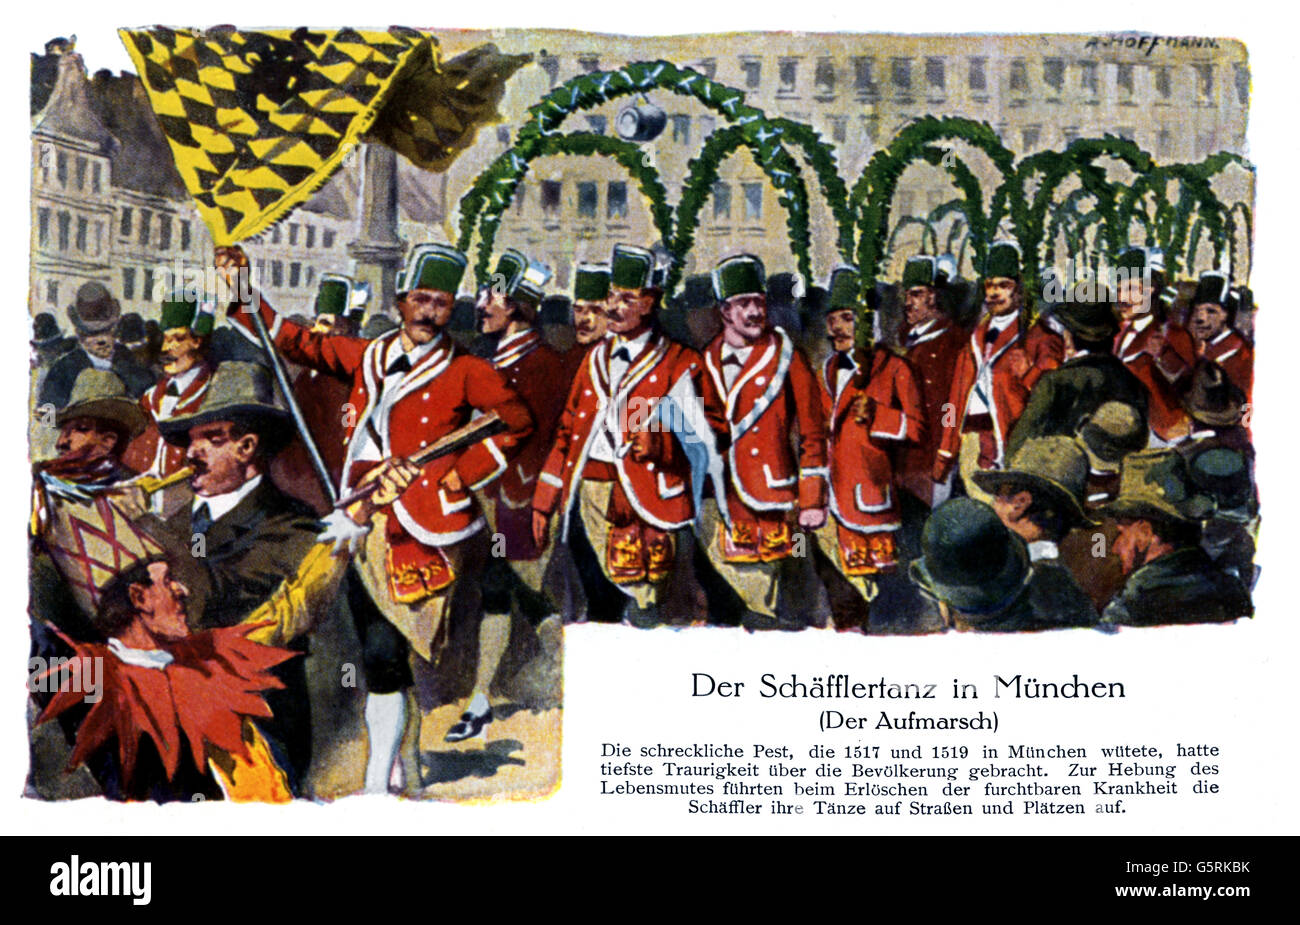 custom, Schäefflertanz (Cooper's Dance) in Munich, Germany, drawing, art postcard, A. Hoffmann, 1900,coopers, cooper, Kingdom of Bavaria, Imperial Era, 19th century, historic, historical, 1900s, 20th century, people, Additional-Rights-Clearences-Not Available Stock Photo